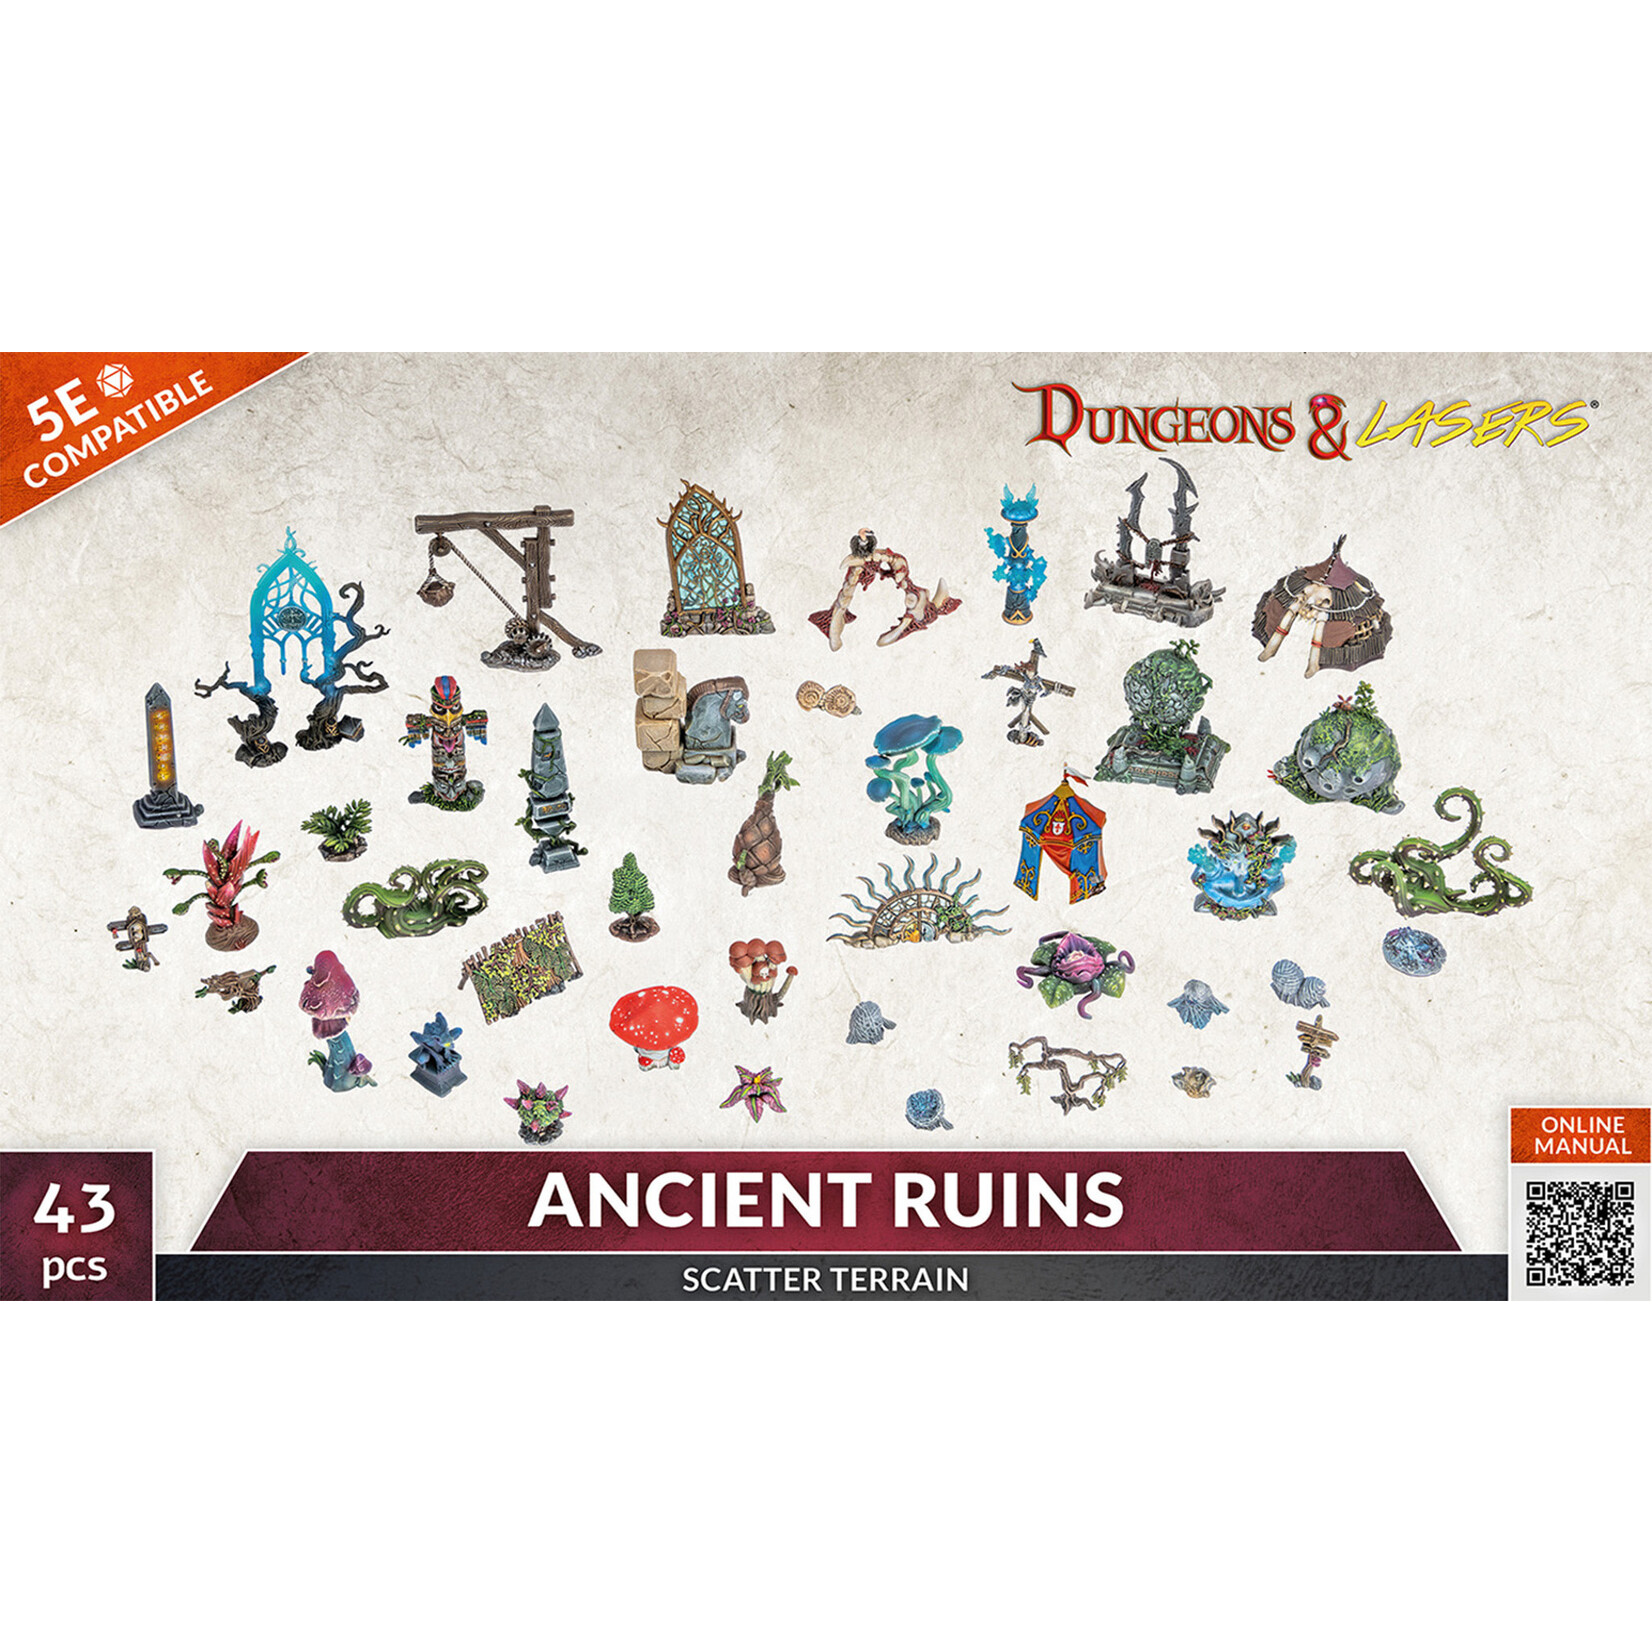 Archon Studio Dungeons & Lasers Ancient Ruins